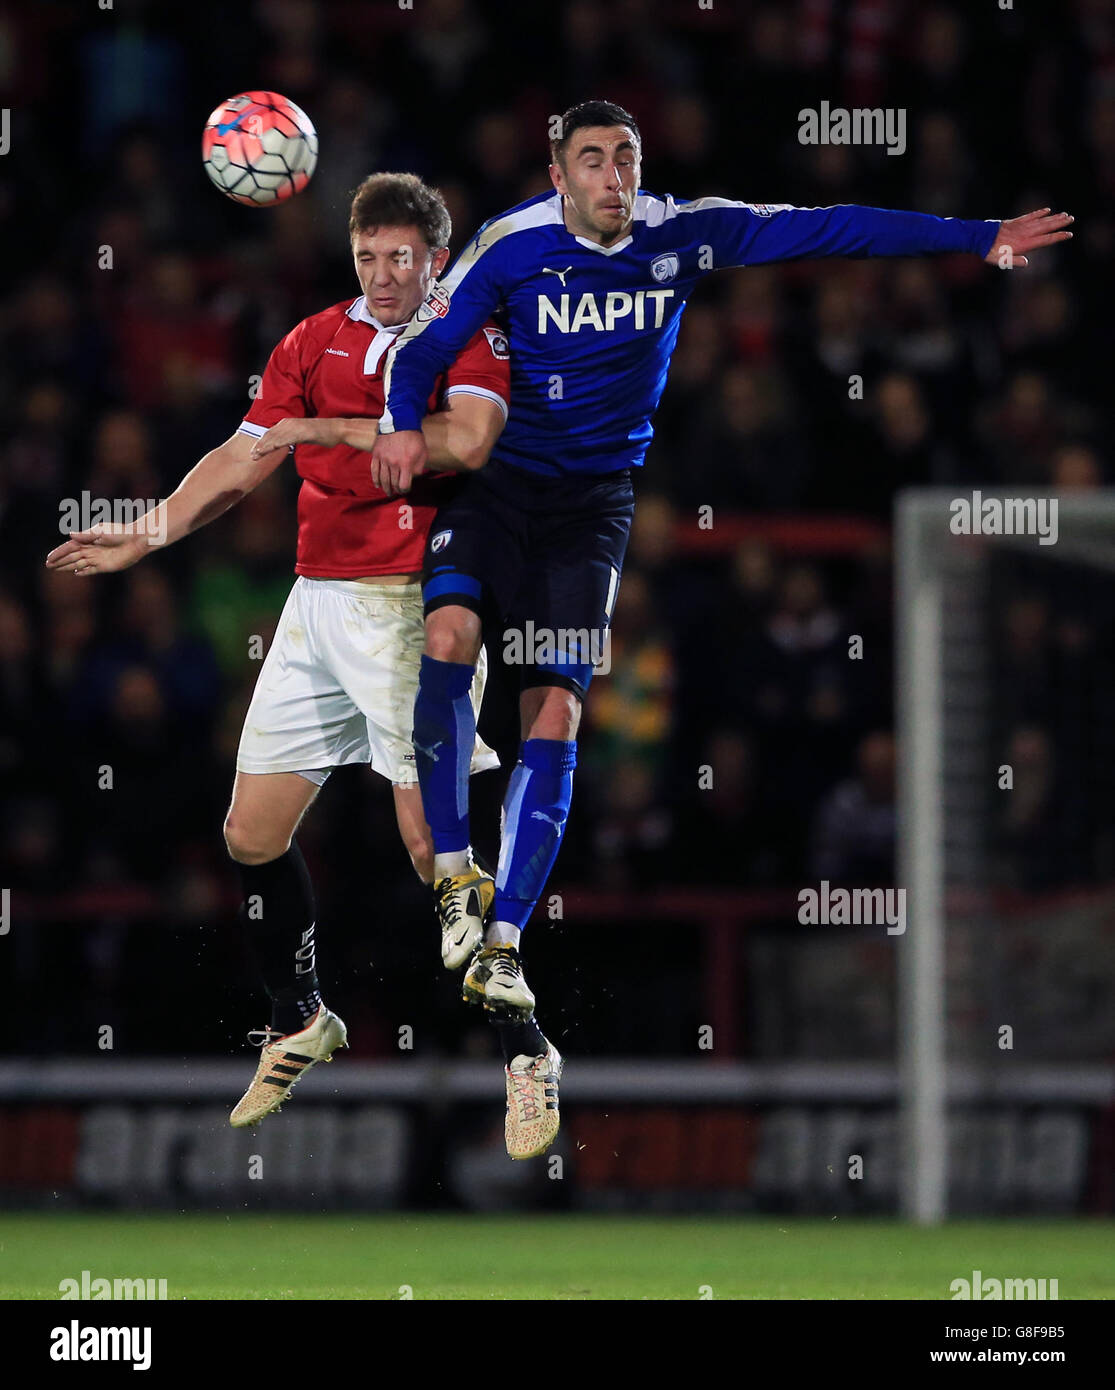 FC United of Manchester's Chris Lynch (left) and Chesterfield's Lee Novak battle for the ball in the air during the Emirates FA Cup, First Round match at Broadhurst Park, Manchester. Stock Photo